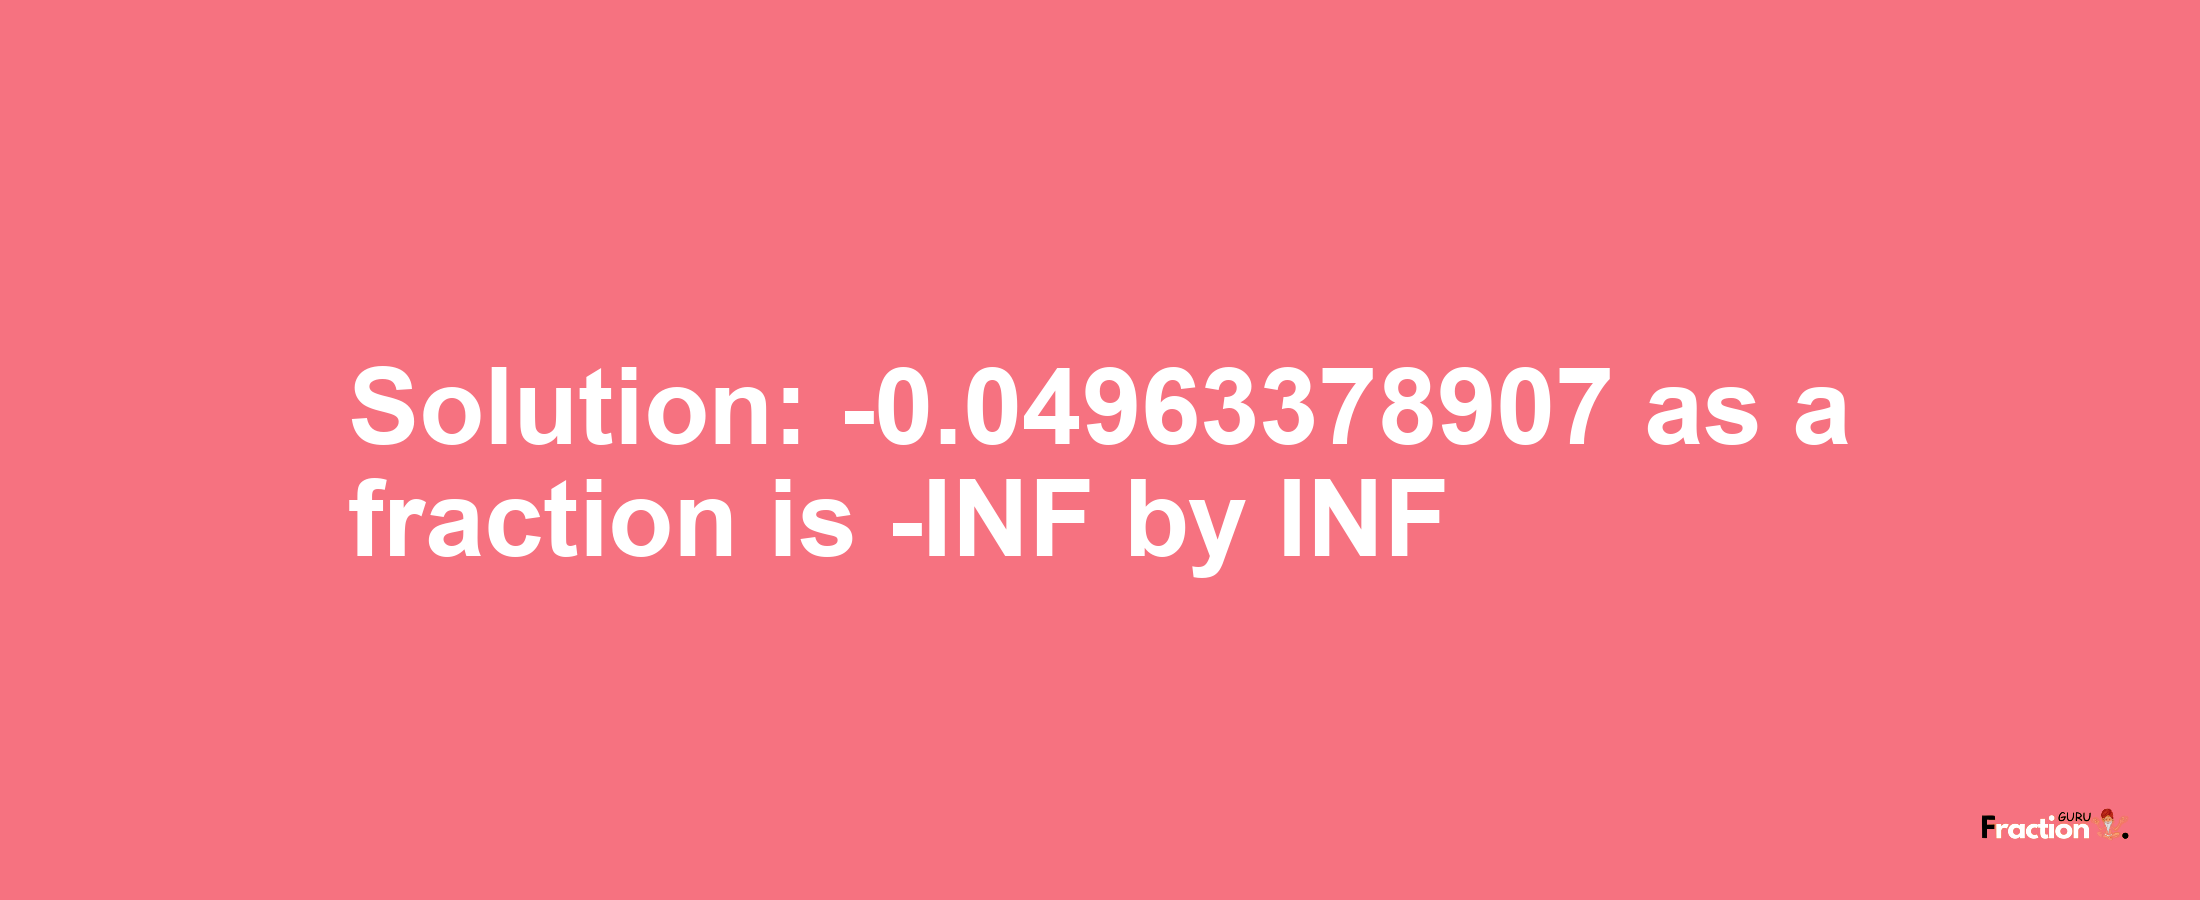 Solution:-0.04963378907 as a fraction is -INF/INF